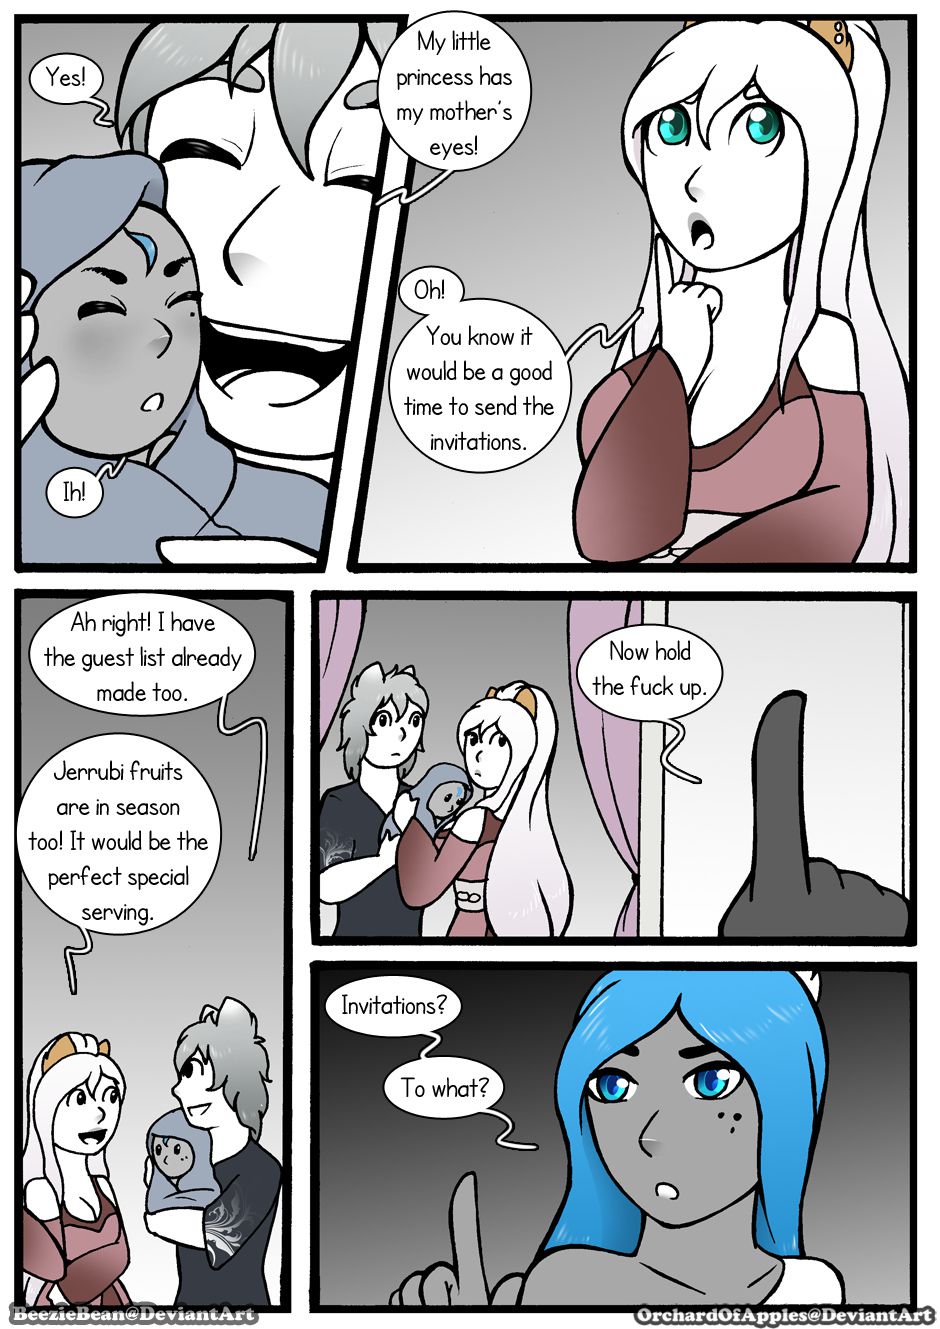 [Jeny-jen94] Between Kings and Queens [Ongoing] 355